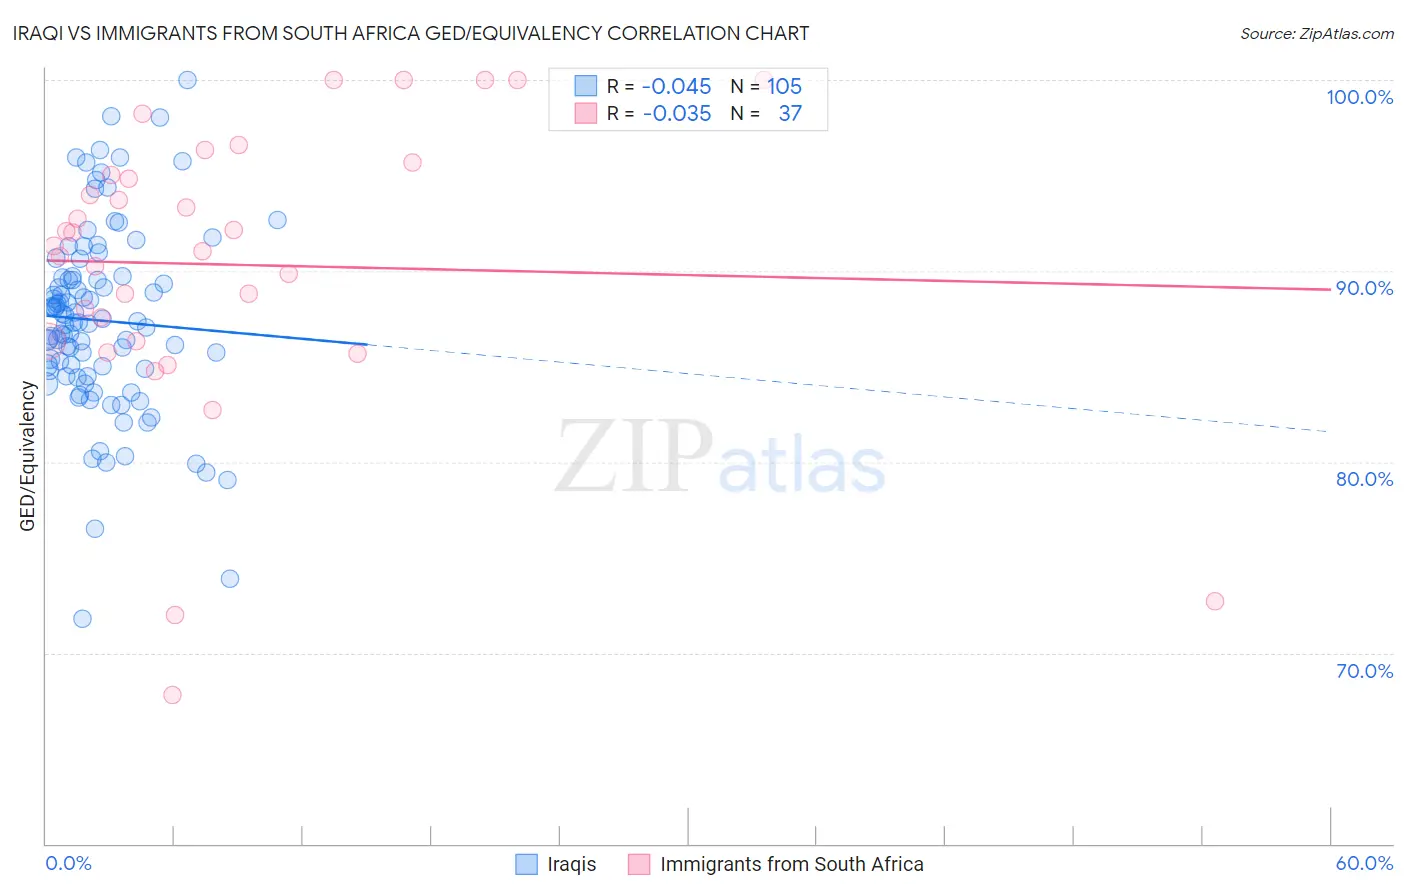 Iraqi vs Immigrants from South Africa GED/Equivalency